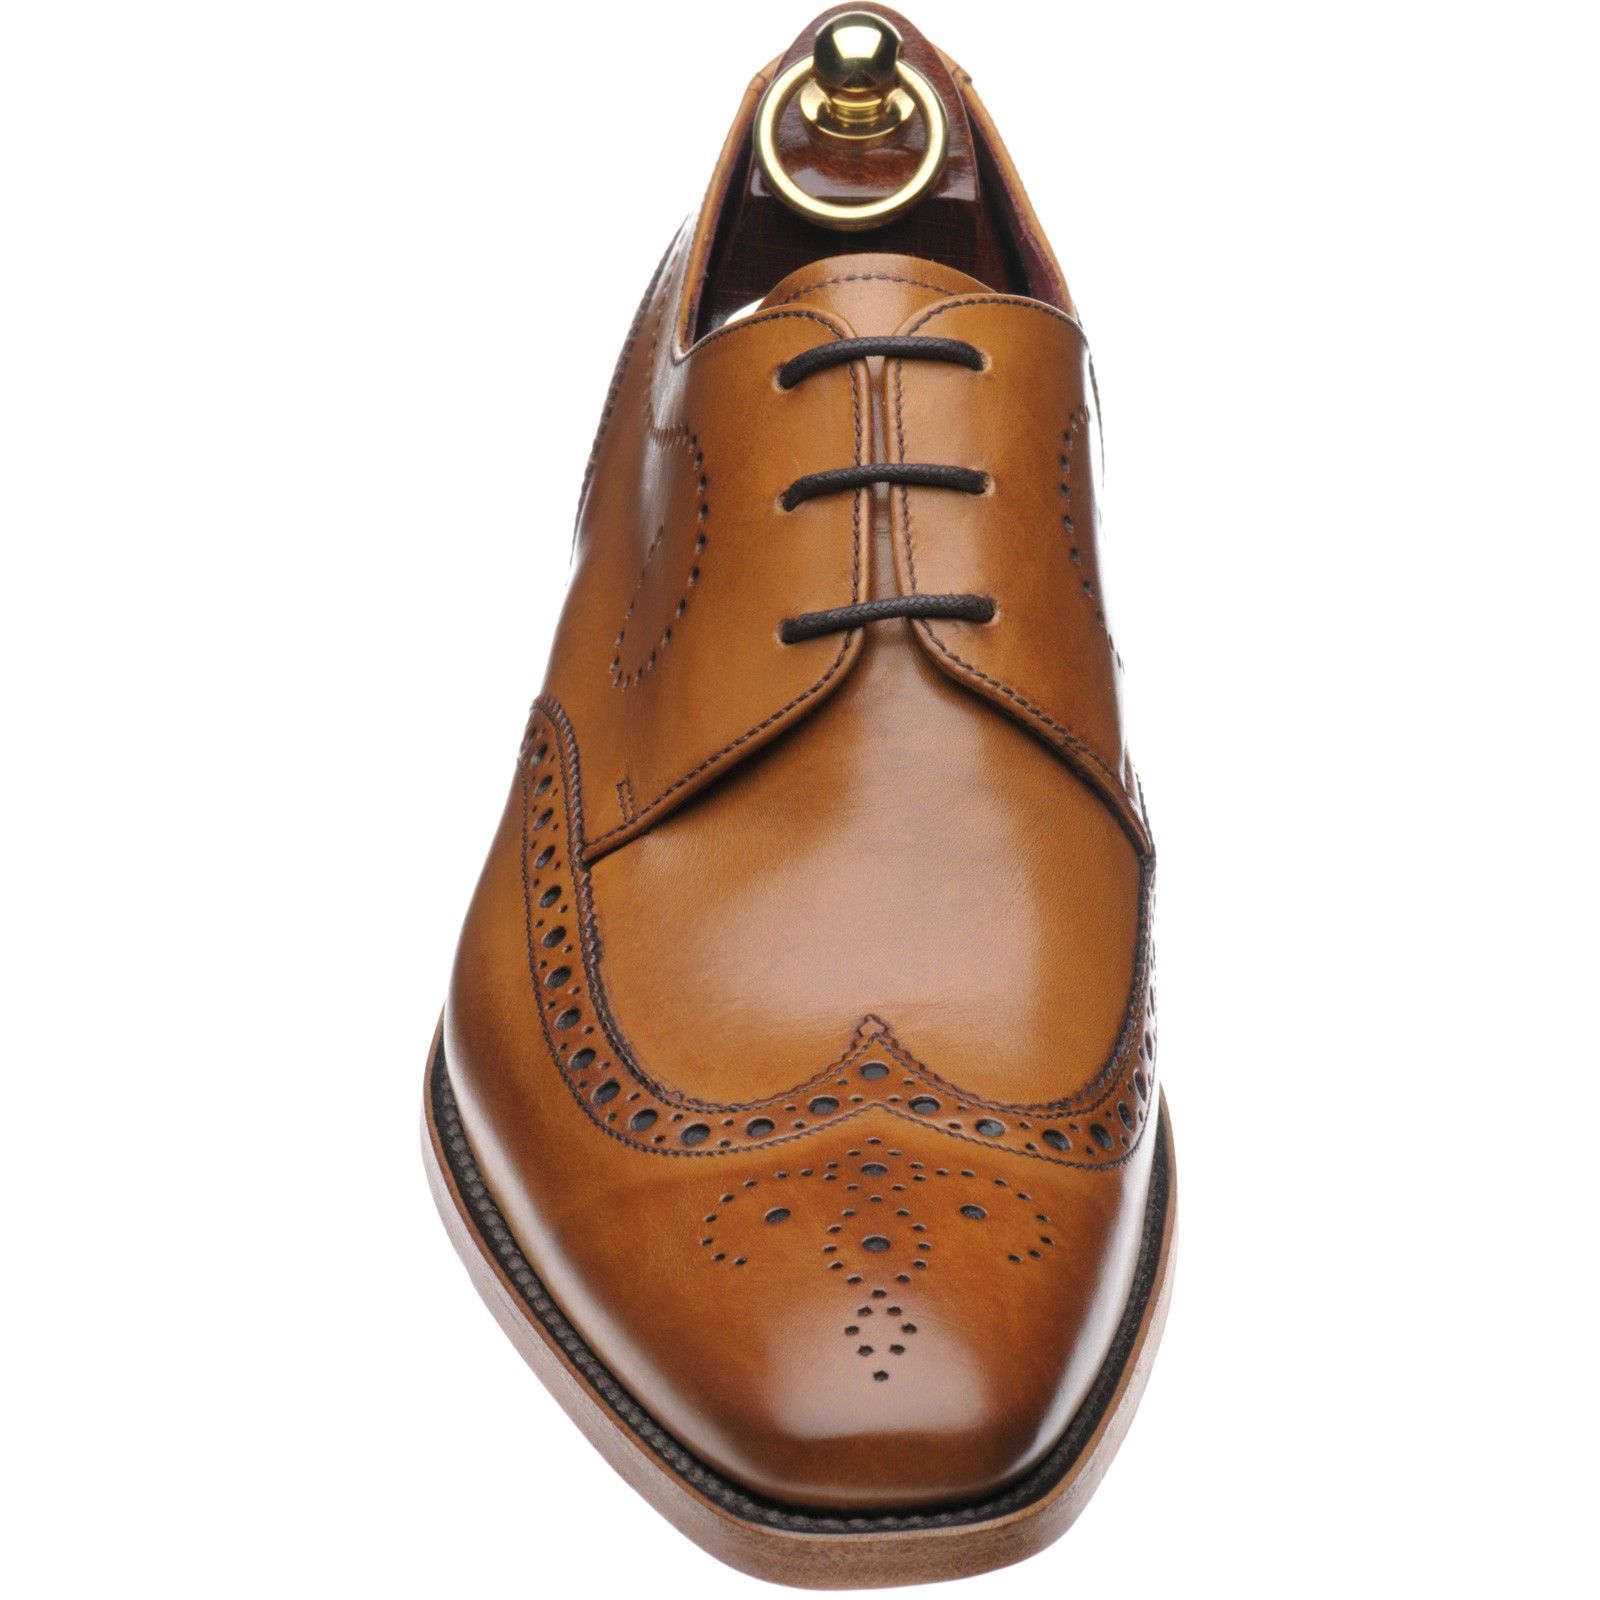 LOAKE Kruger Derby Brogue shoe - Tan Calf -Angle View